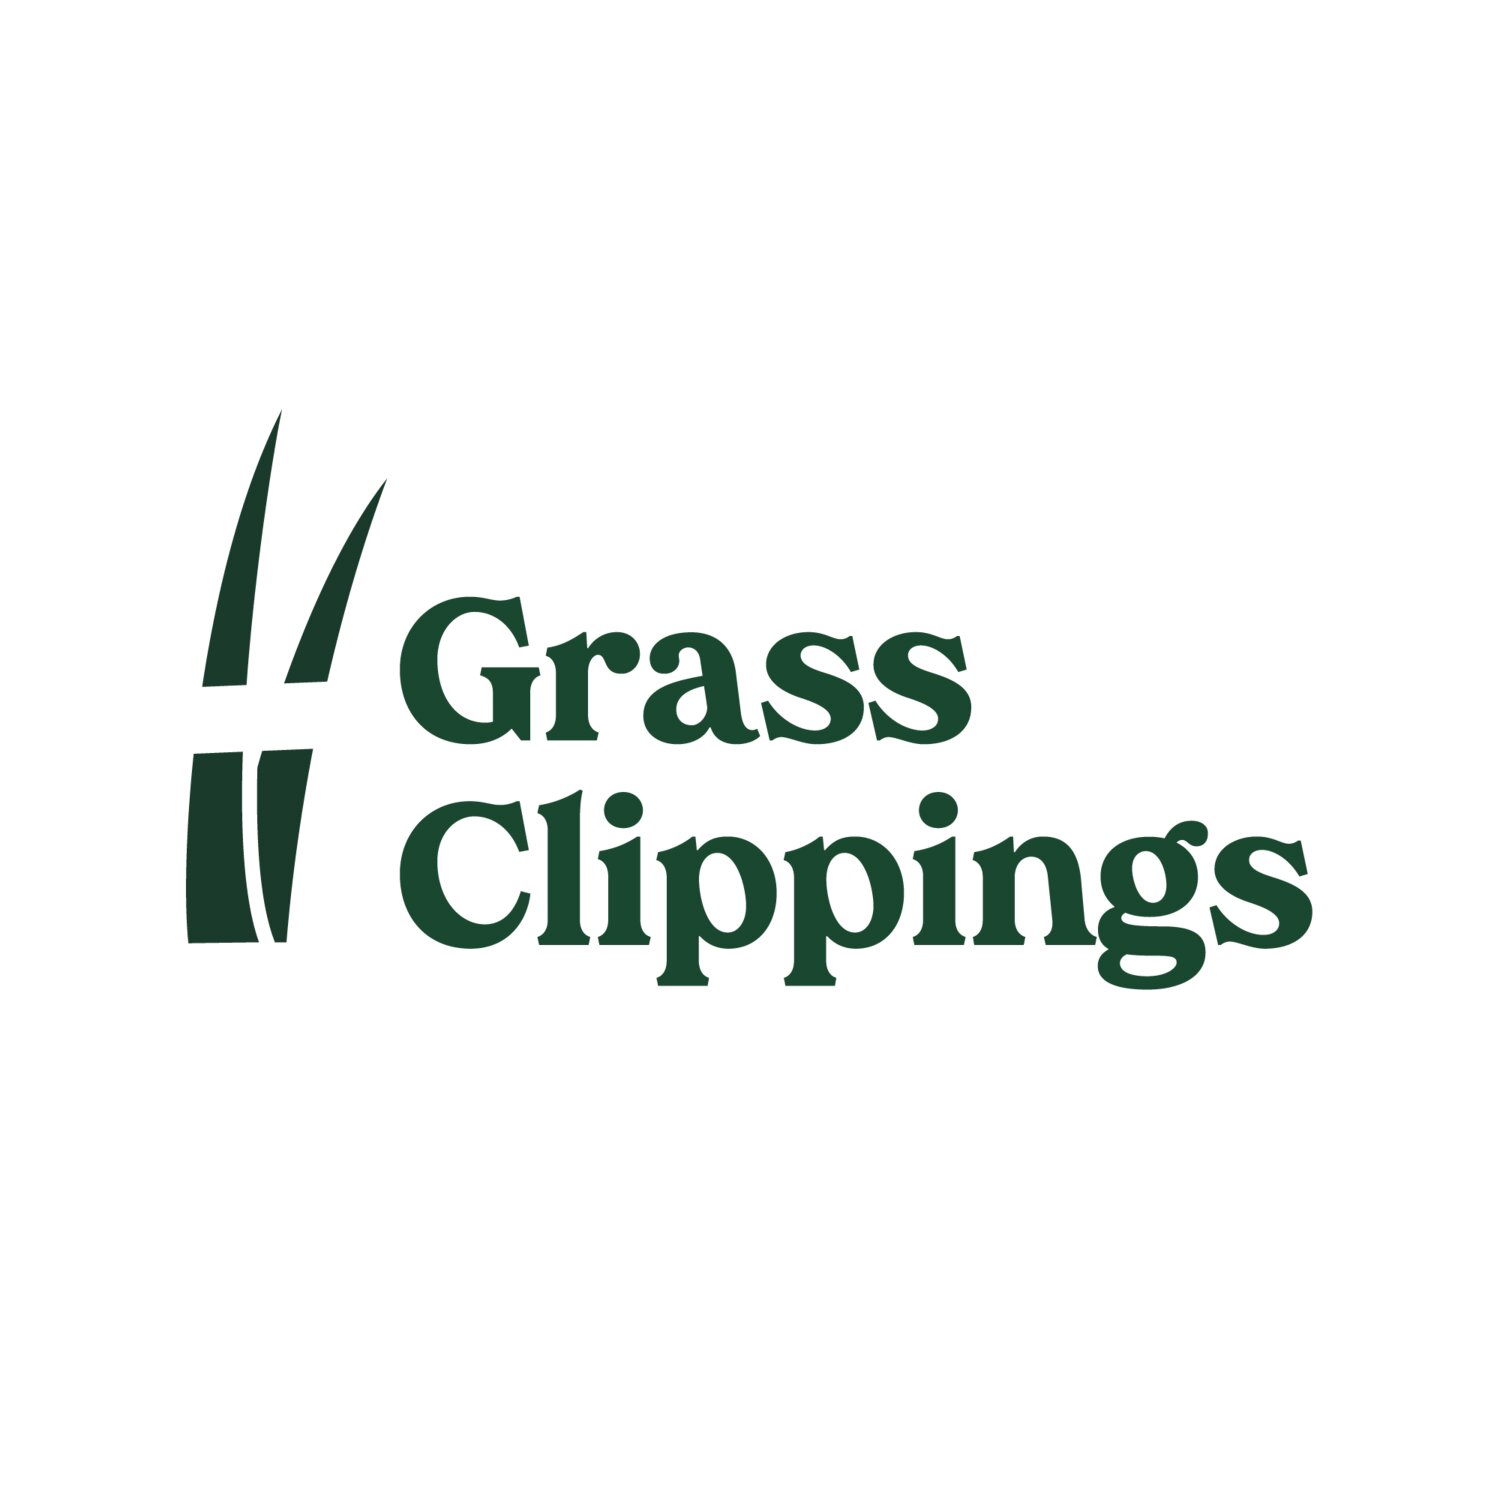 Phoenix-based Grass Clippings will begin its anticipated renovations of the former Rolling Hills Golf Course this July.